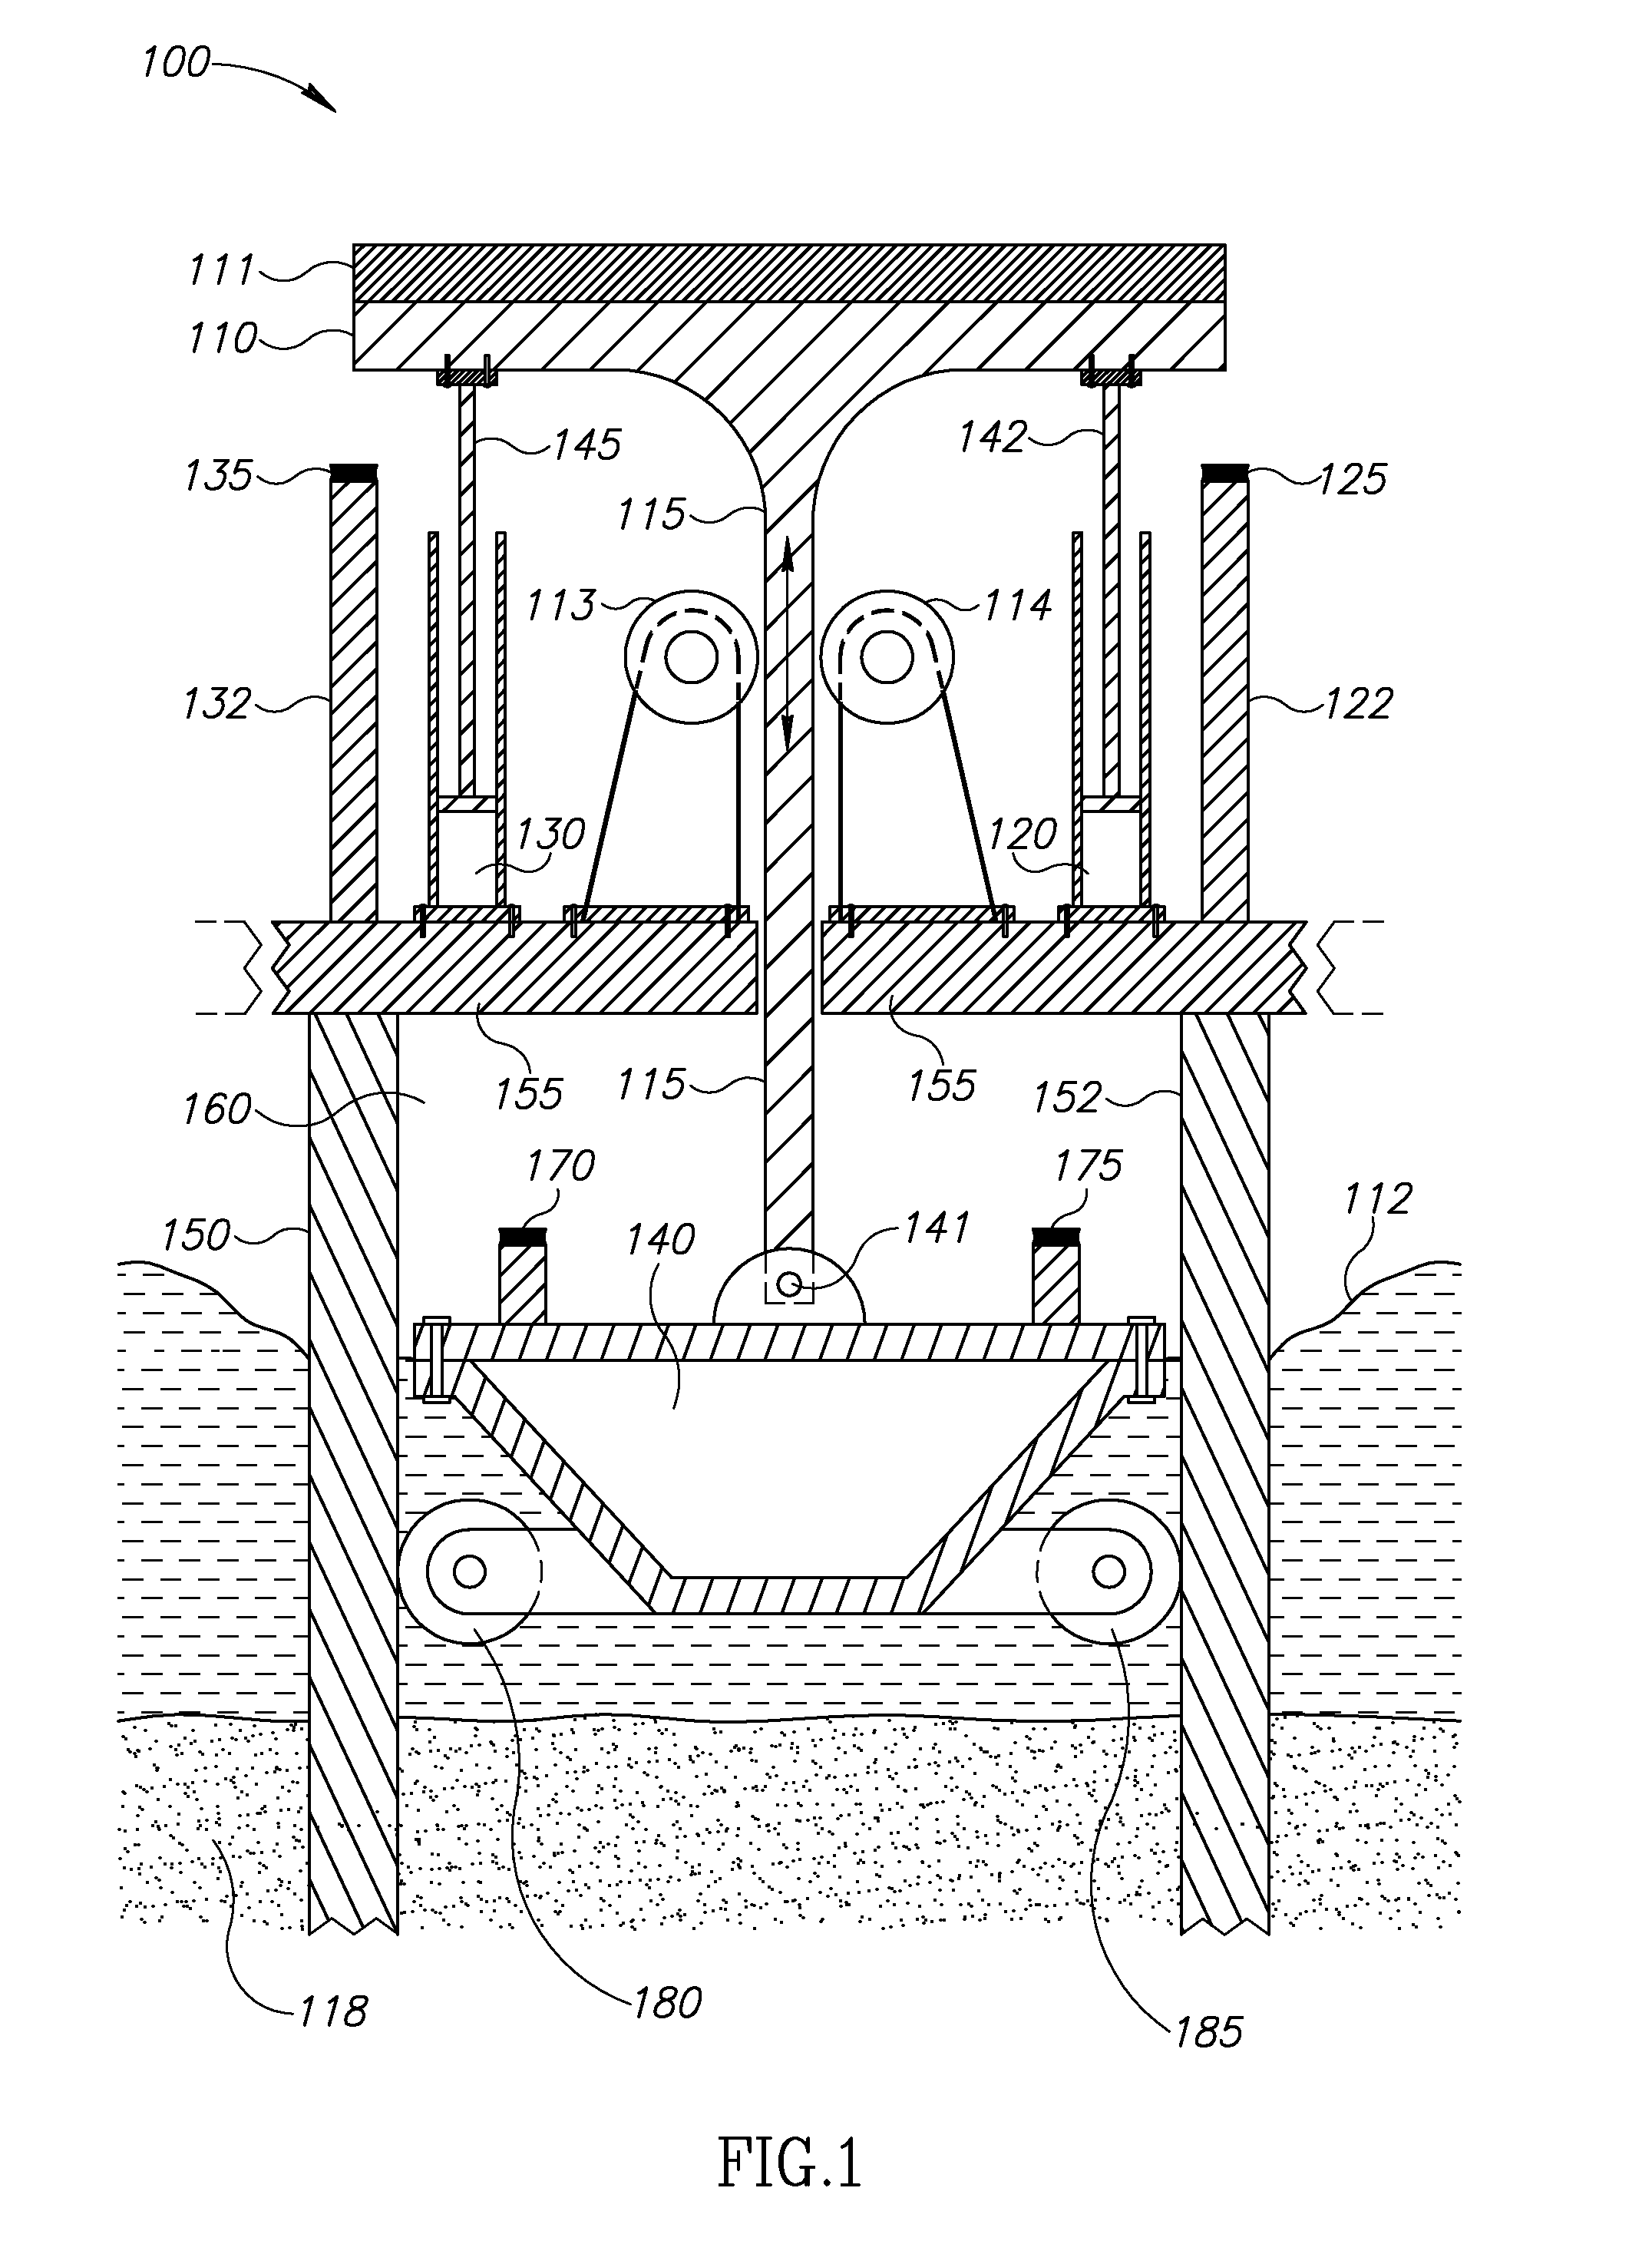 System and method for producing electrical power from waves